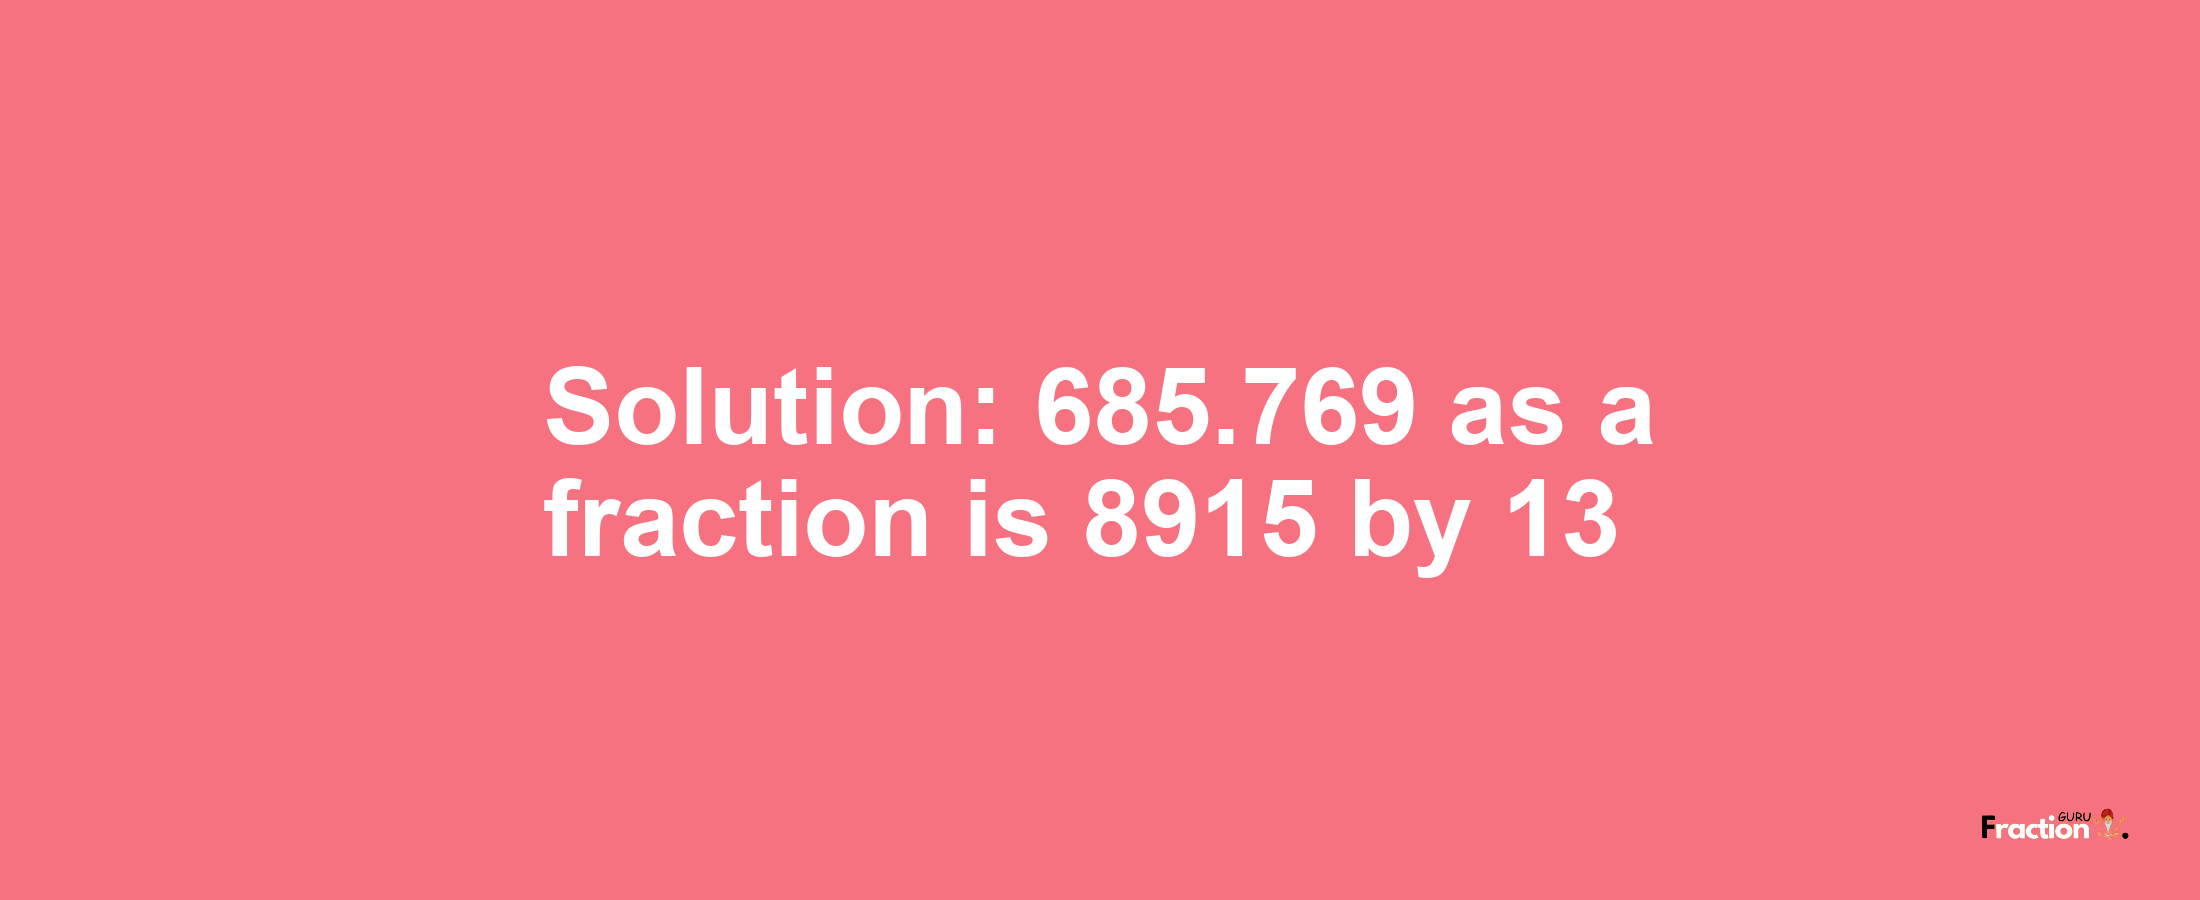 Solution:685.769 as a fraction is 8915/13